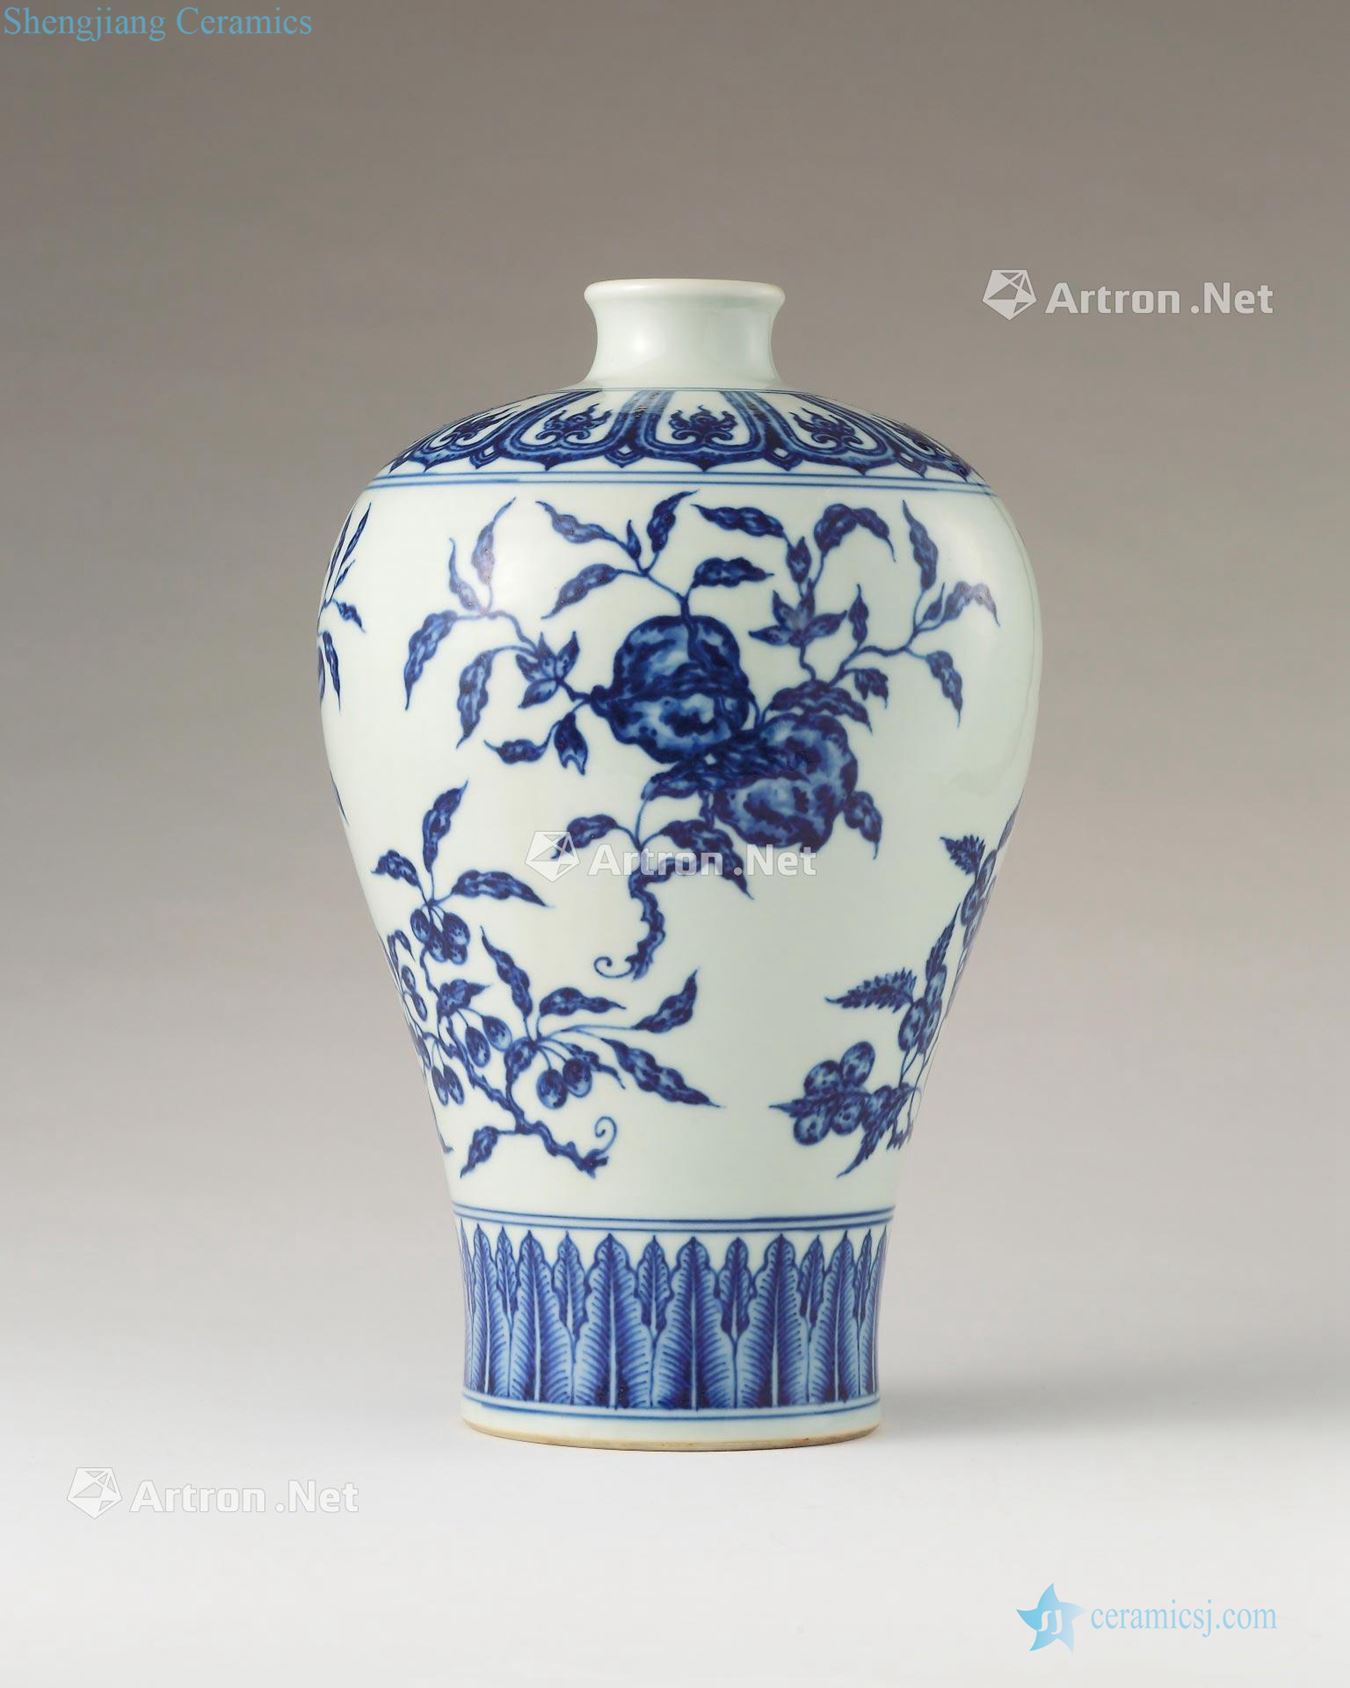 In the 18th century Blue and white sanduo mei bottles